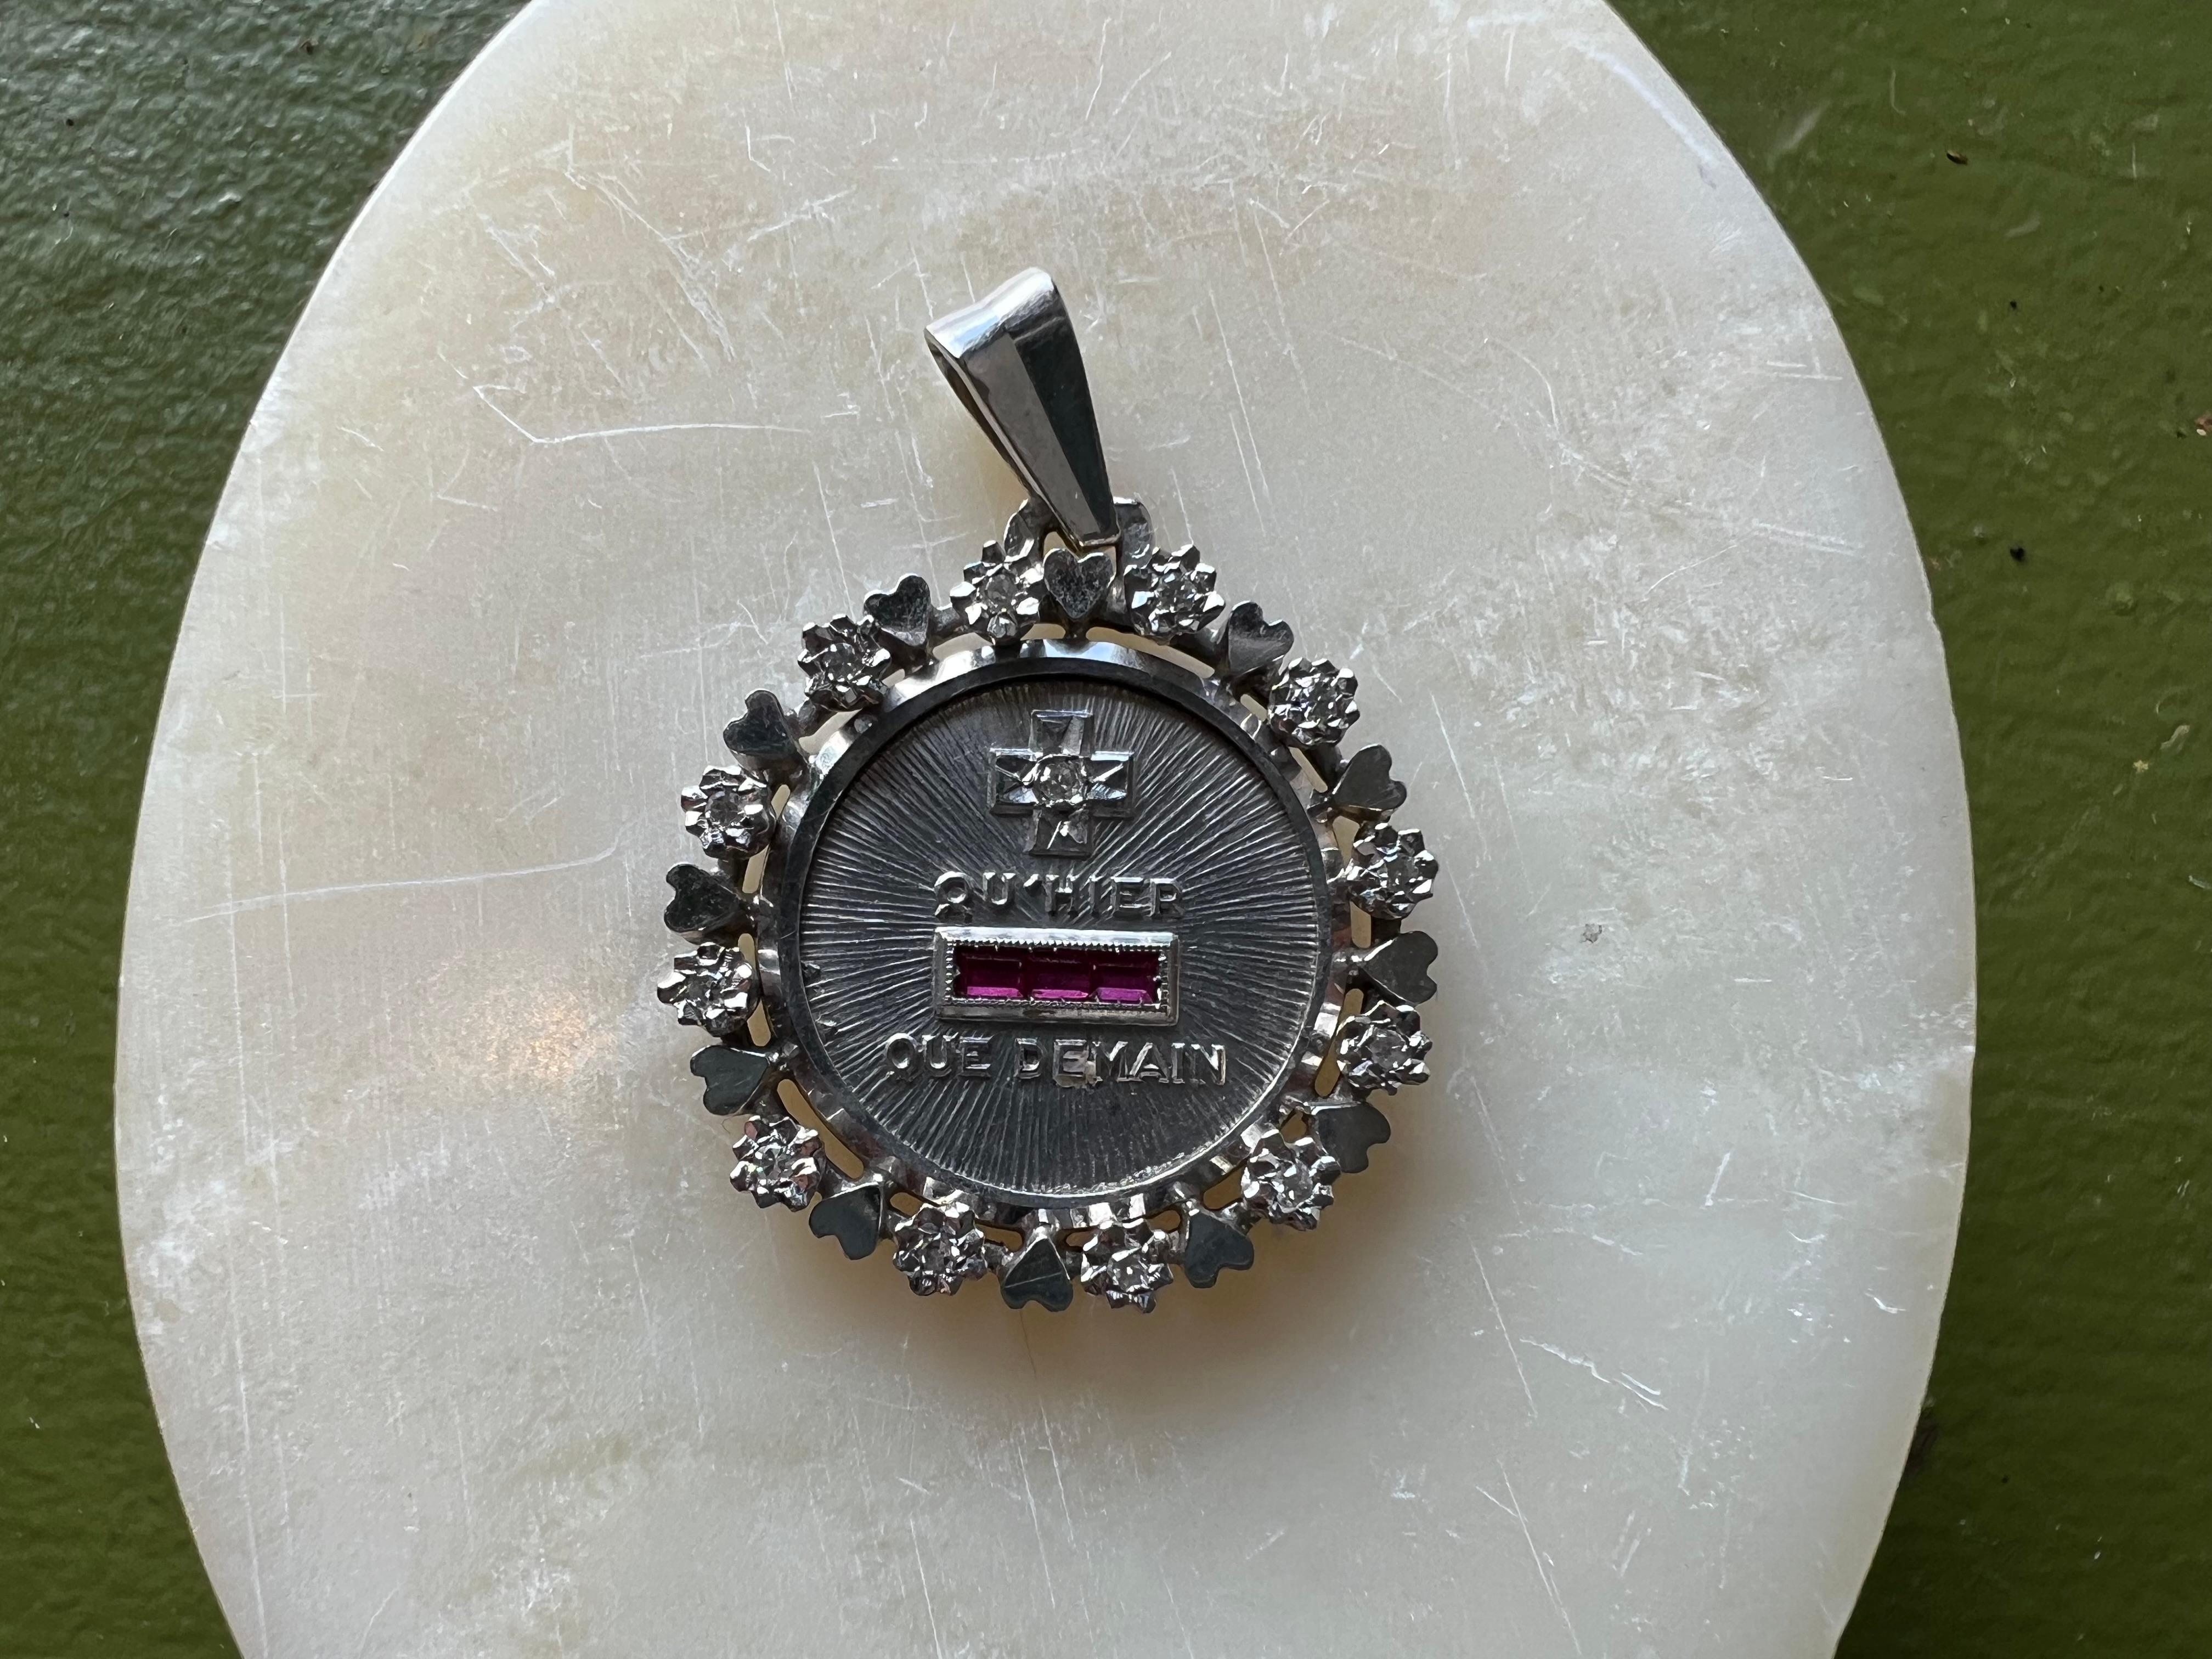 This is a very special edition of the A. Augis Love charm. 

The text reads:  “Plus qu'hier, moins que demain” AKA “More than yesterday less than tomorrow”. 

This comes from a famous poem entitled ''Les Vieux'' by Rosemonde Gérard.

(For, you see,